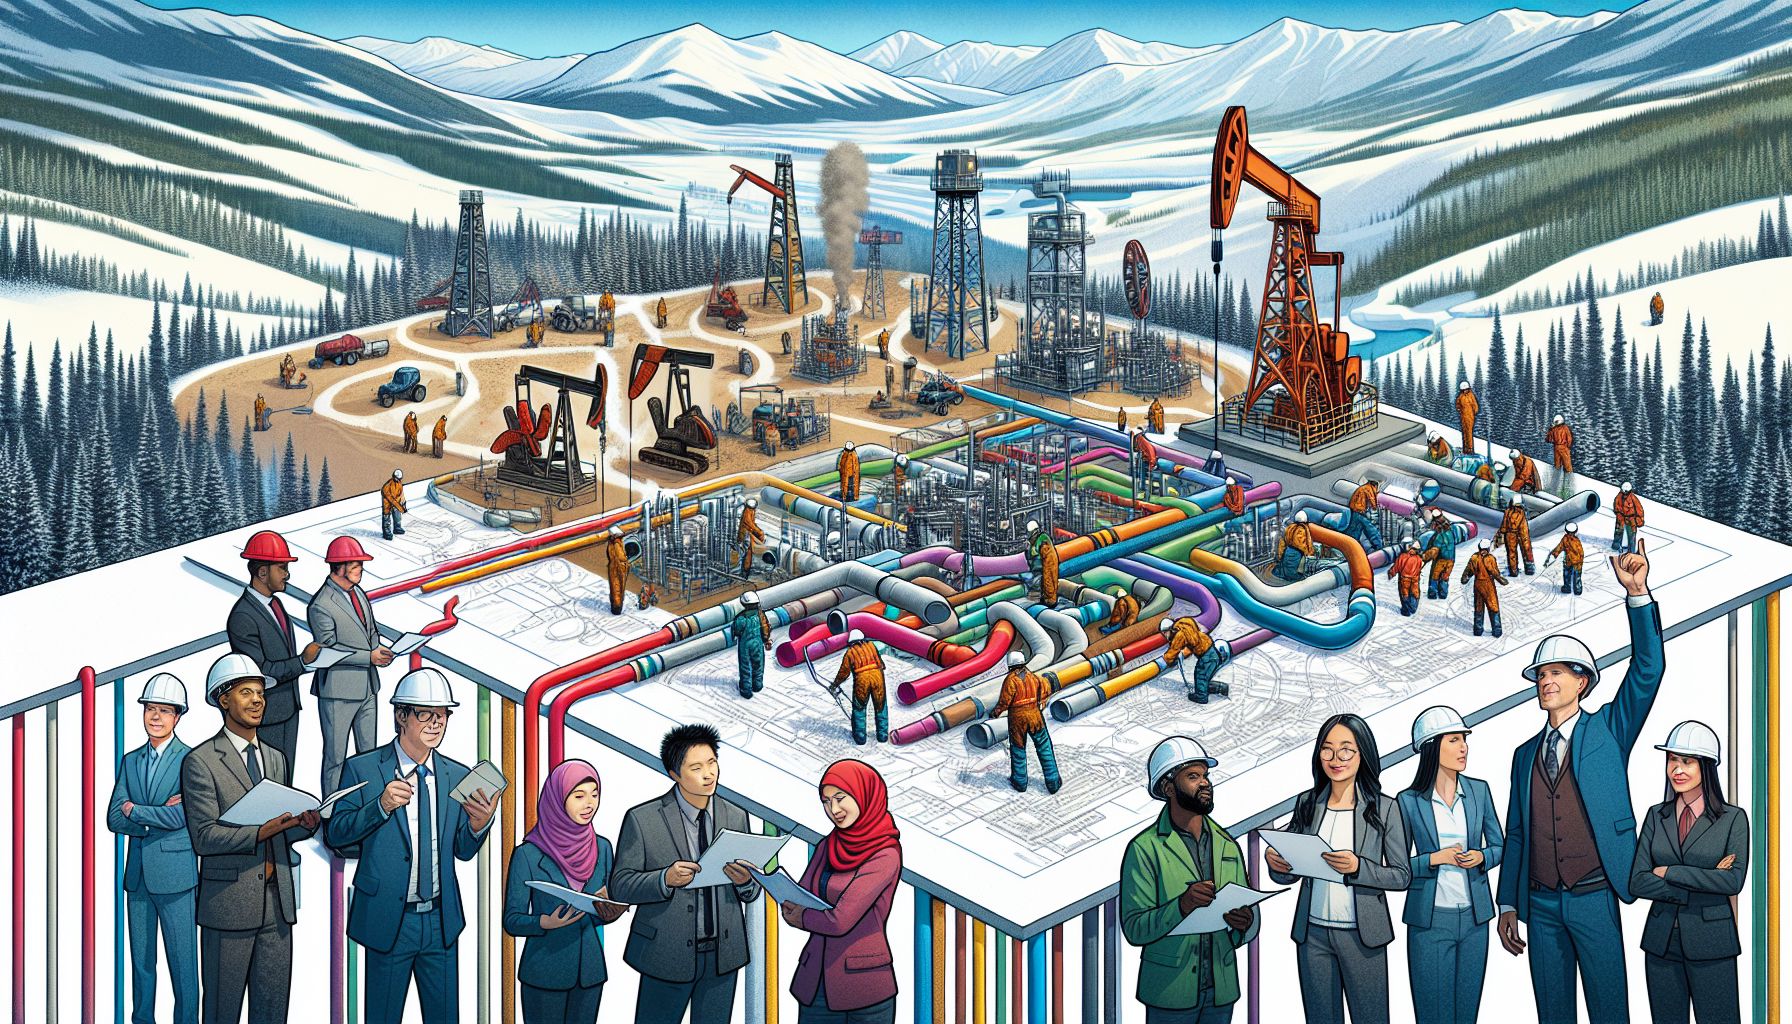 yxzzjngqvn - The Oil & Gas Industry in Canada: A Burst of Creativity